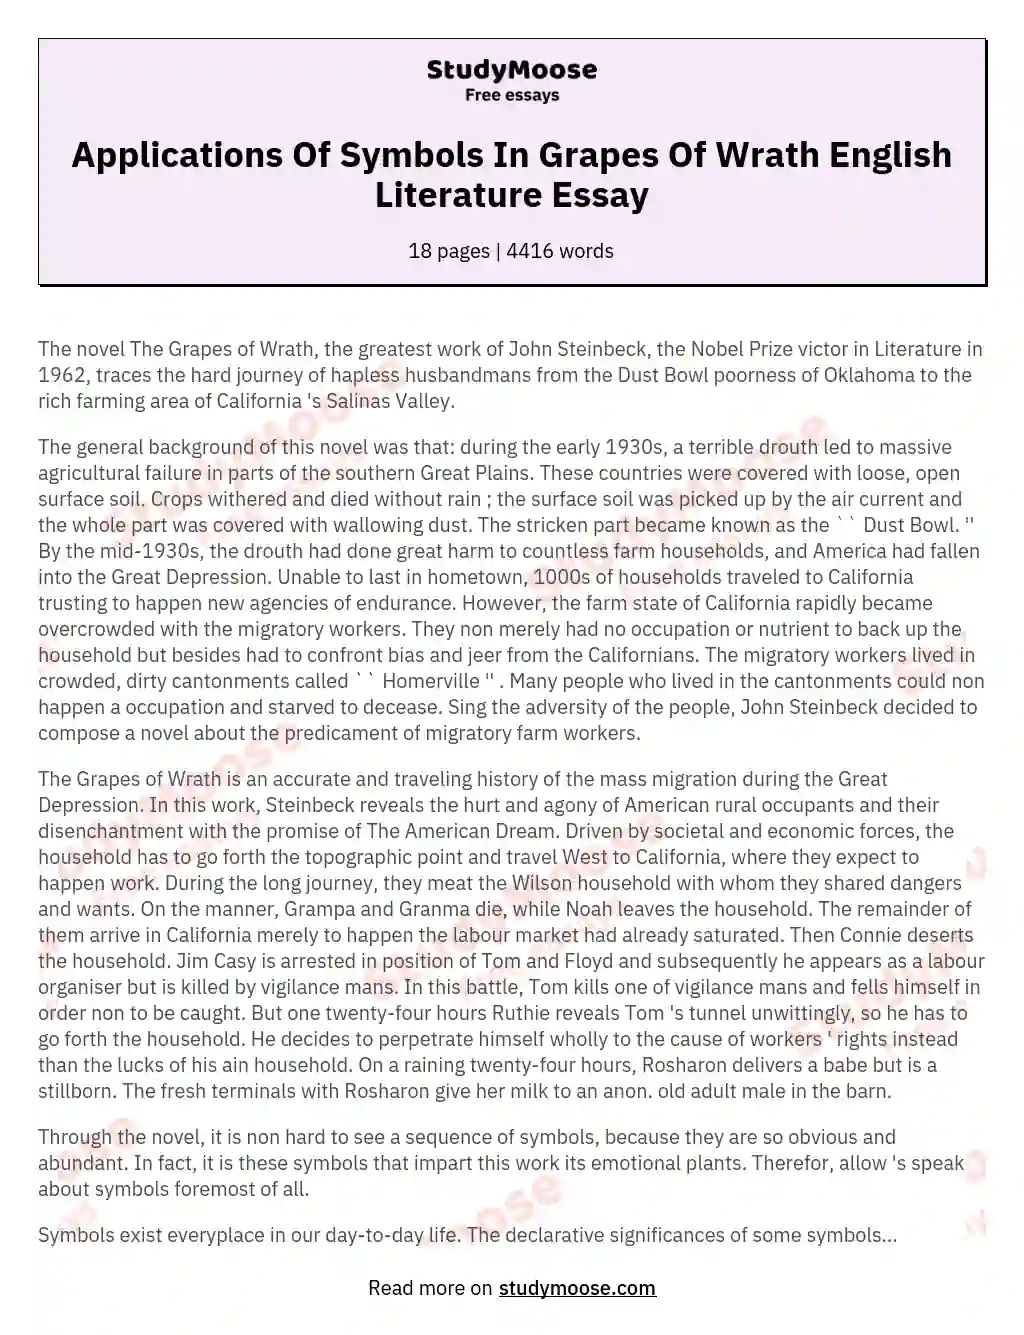 Applications Of Symbols In Grapes Of Wrath English Literature Essay